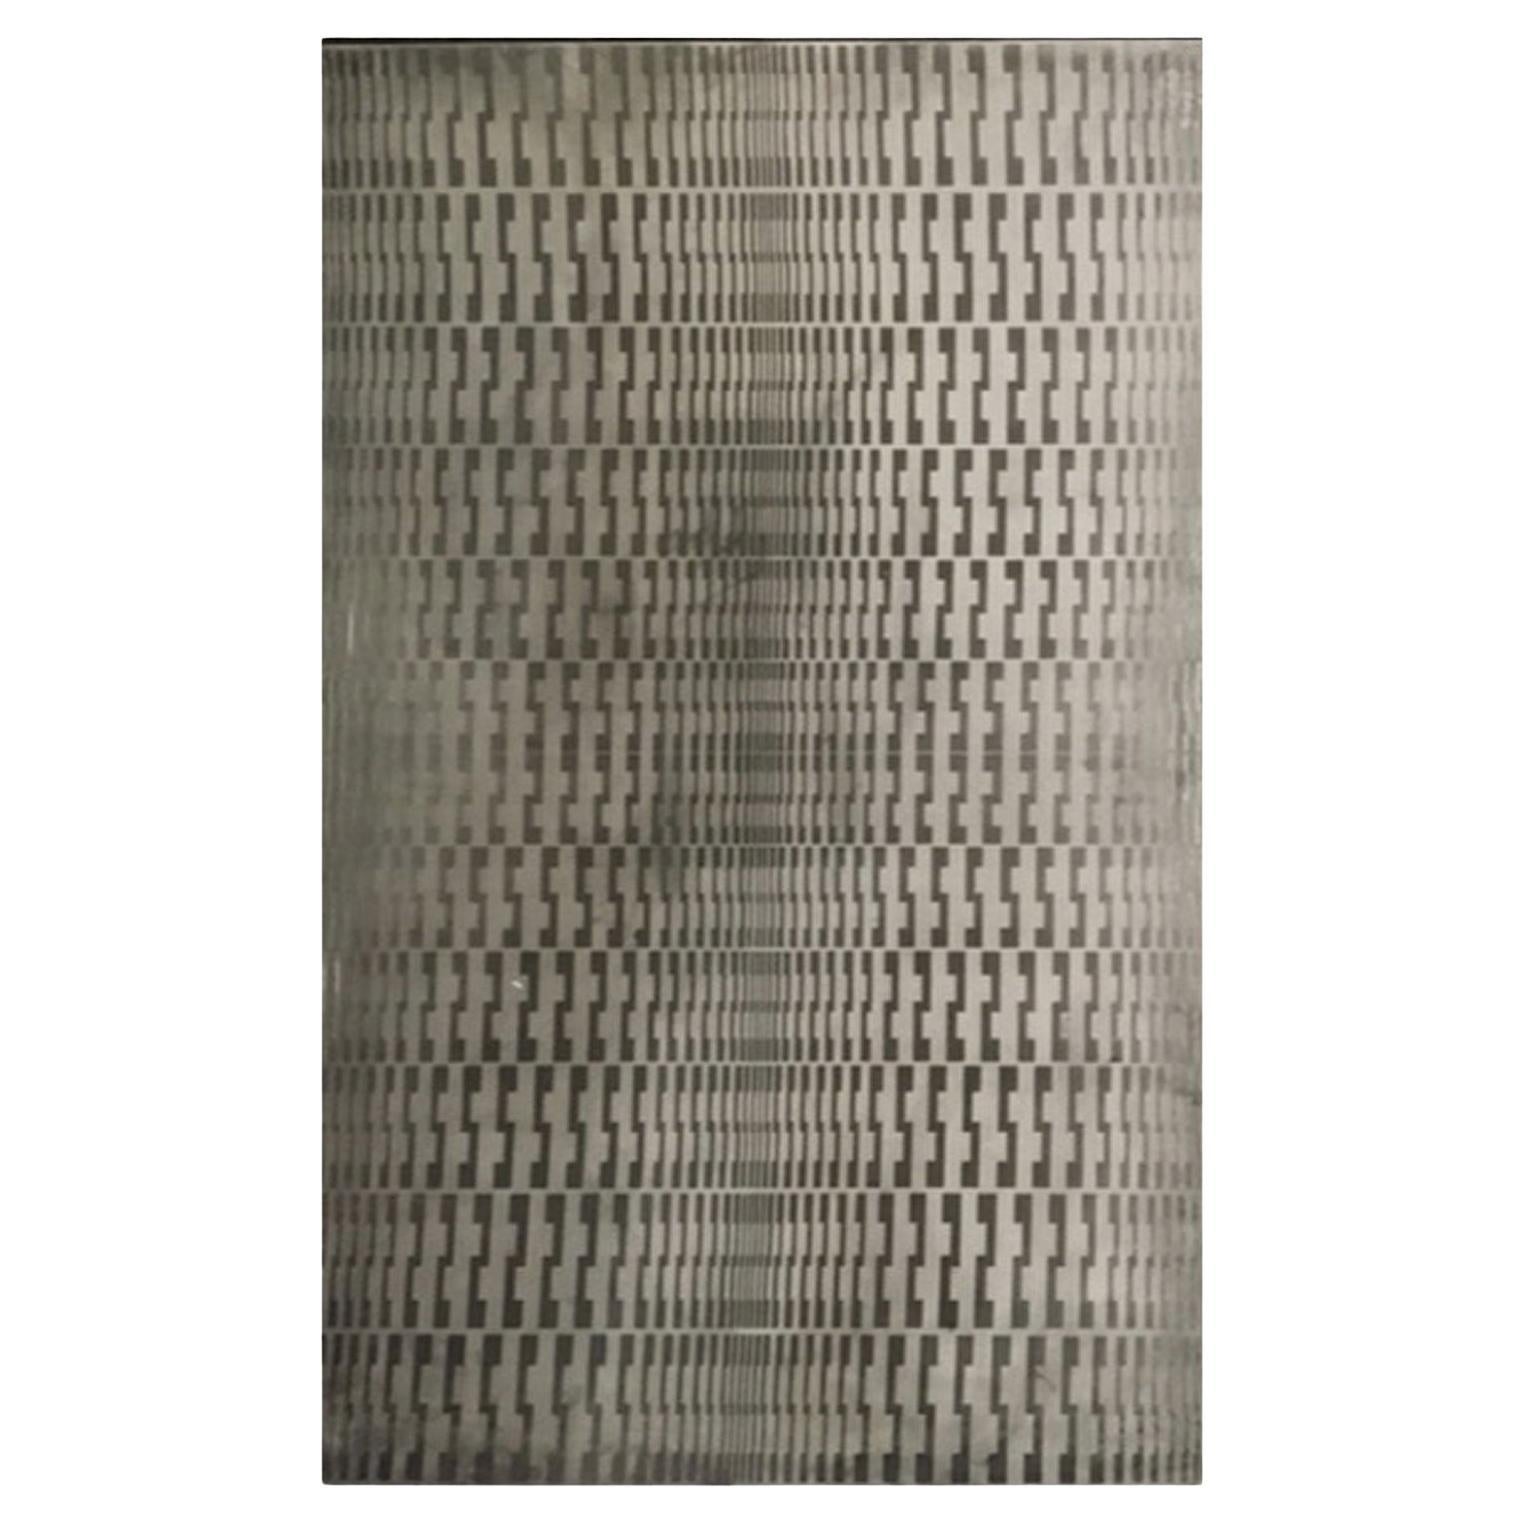 Abstract Modular Kinetic Structure Frosted Stainless Steel Wall Scuplture Panel For Sale